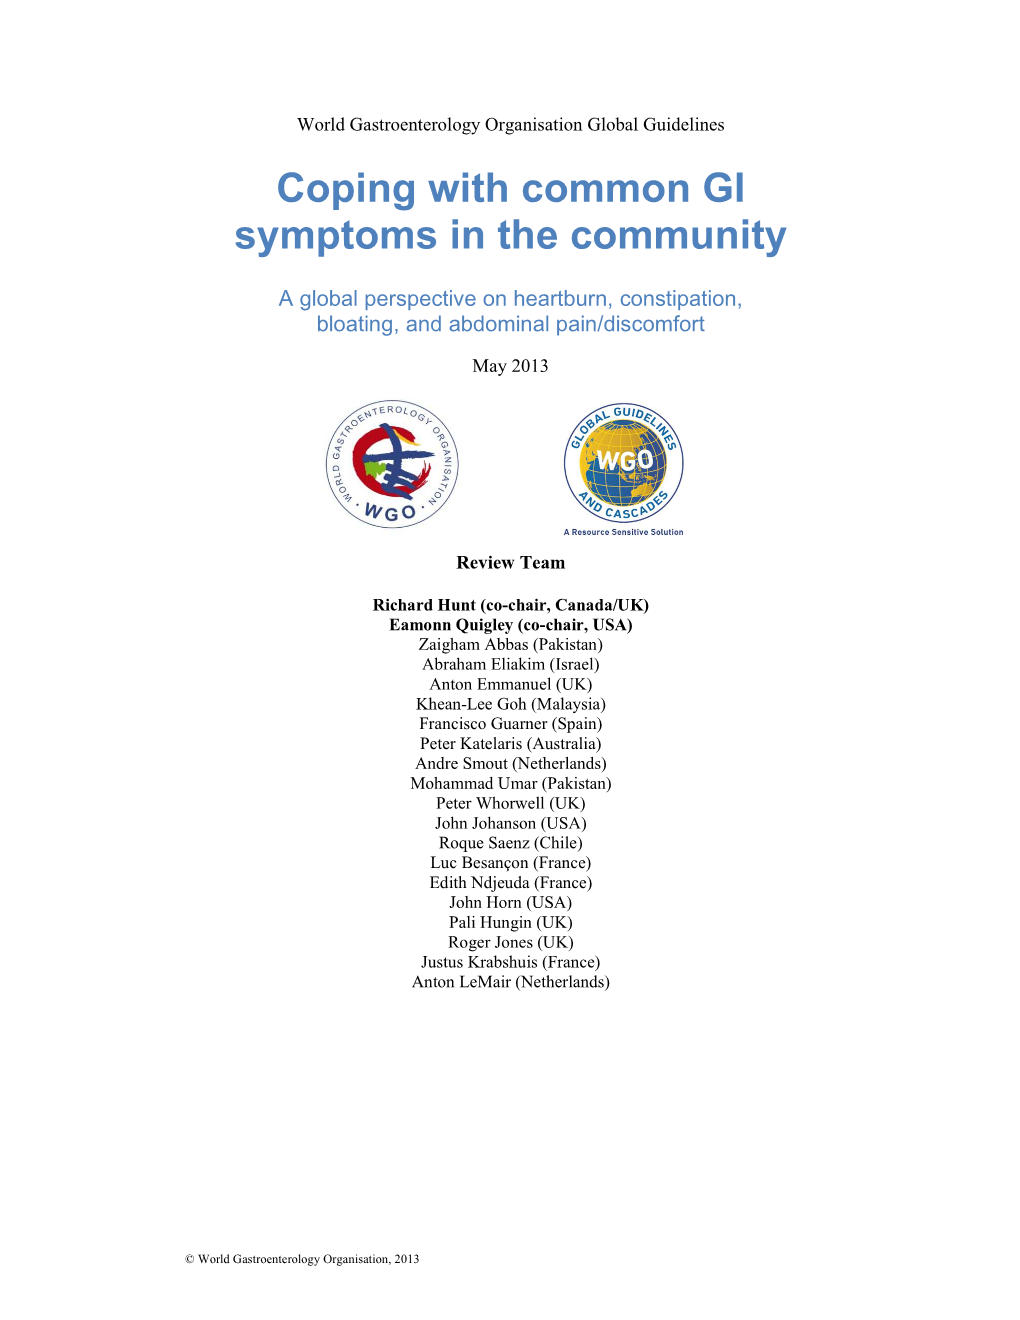 Download the Common GI Symptoms Guideline Now!